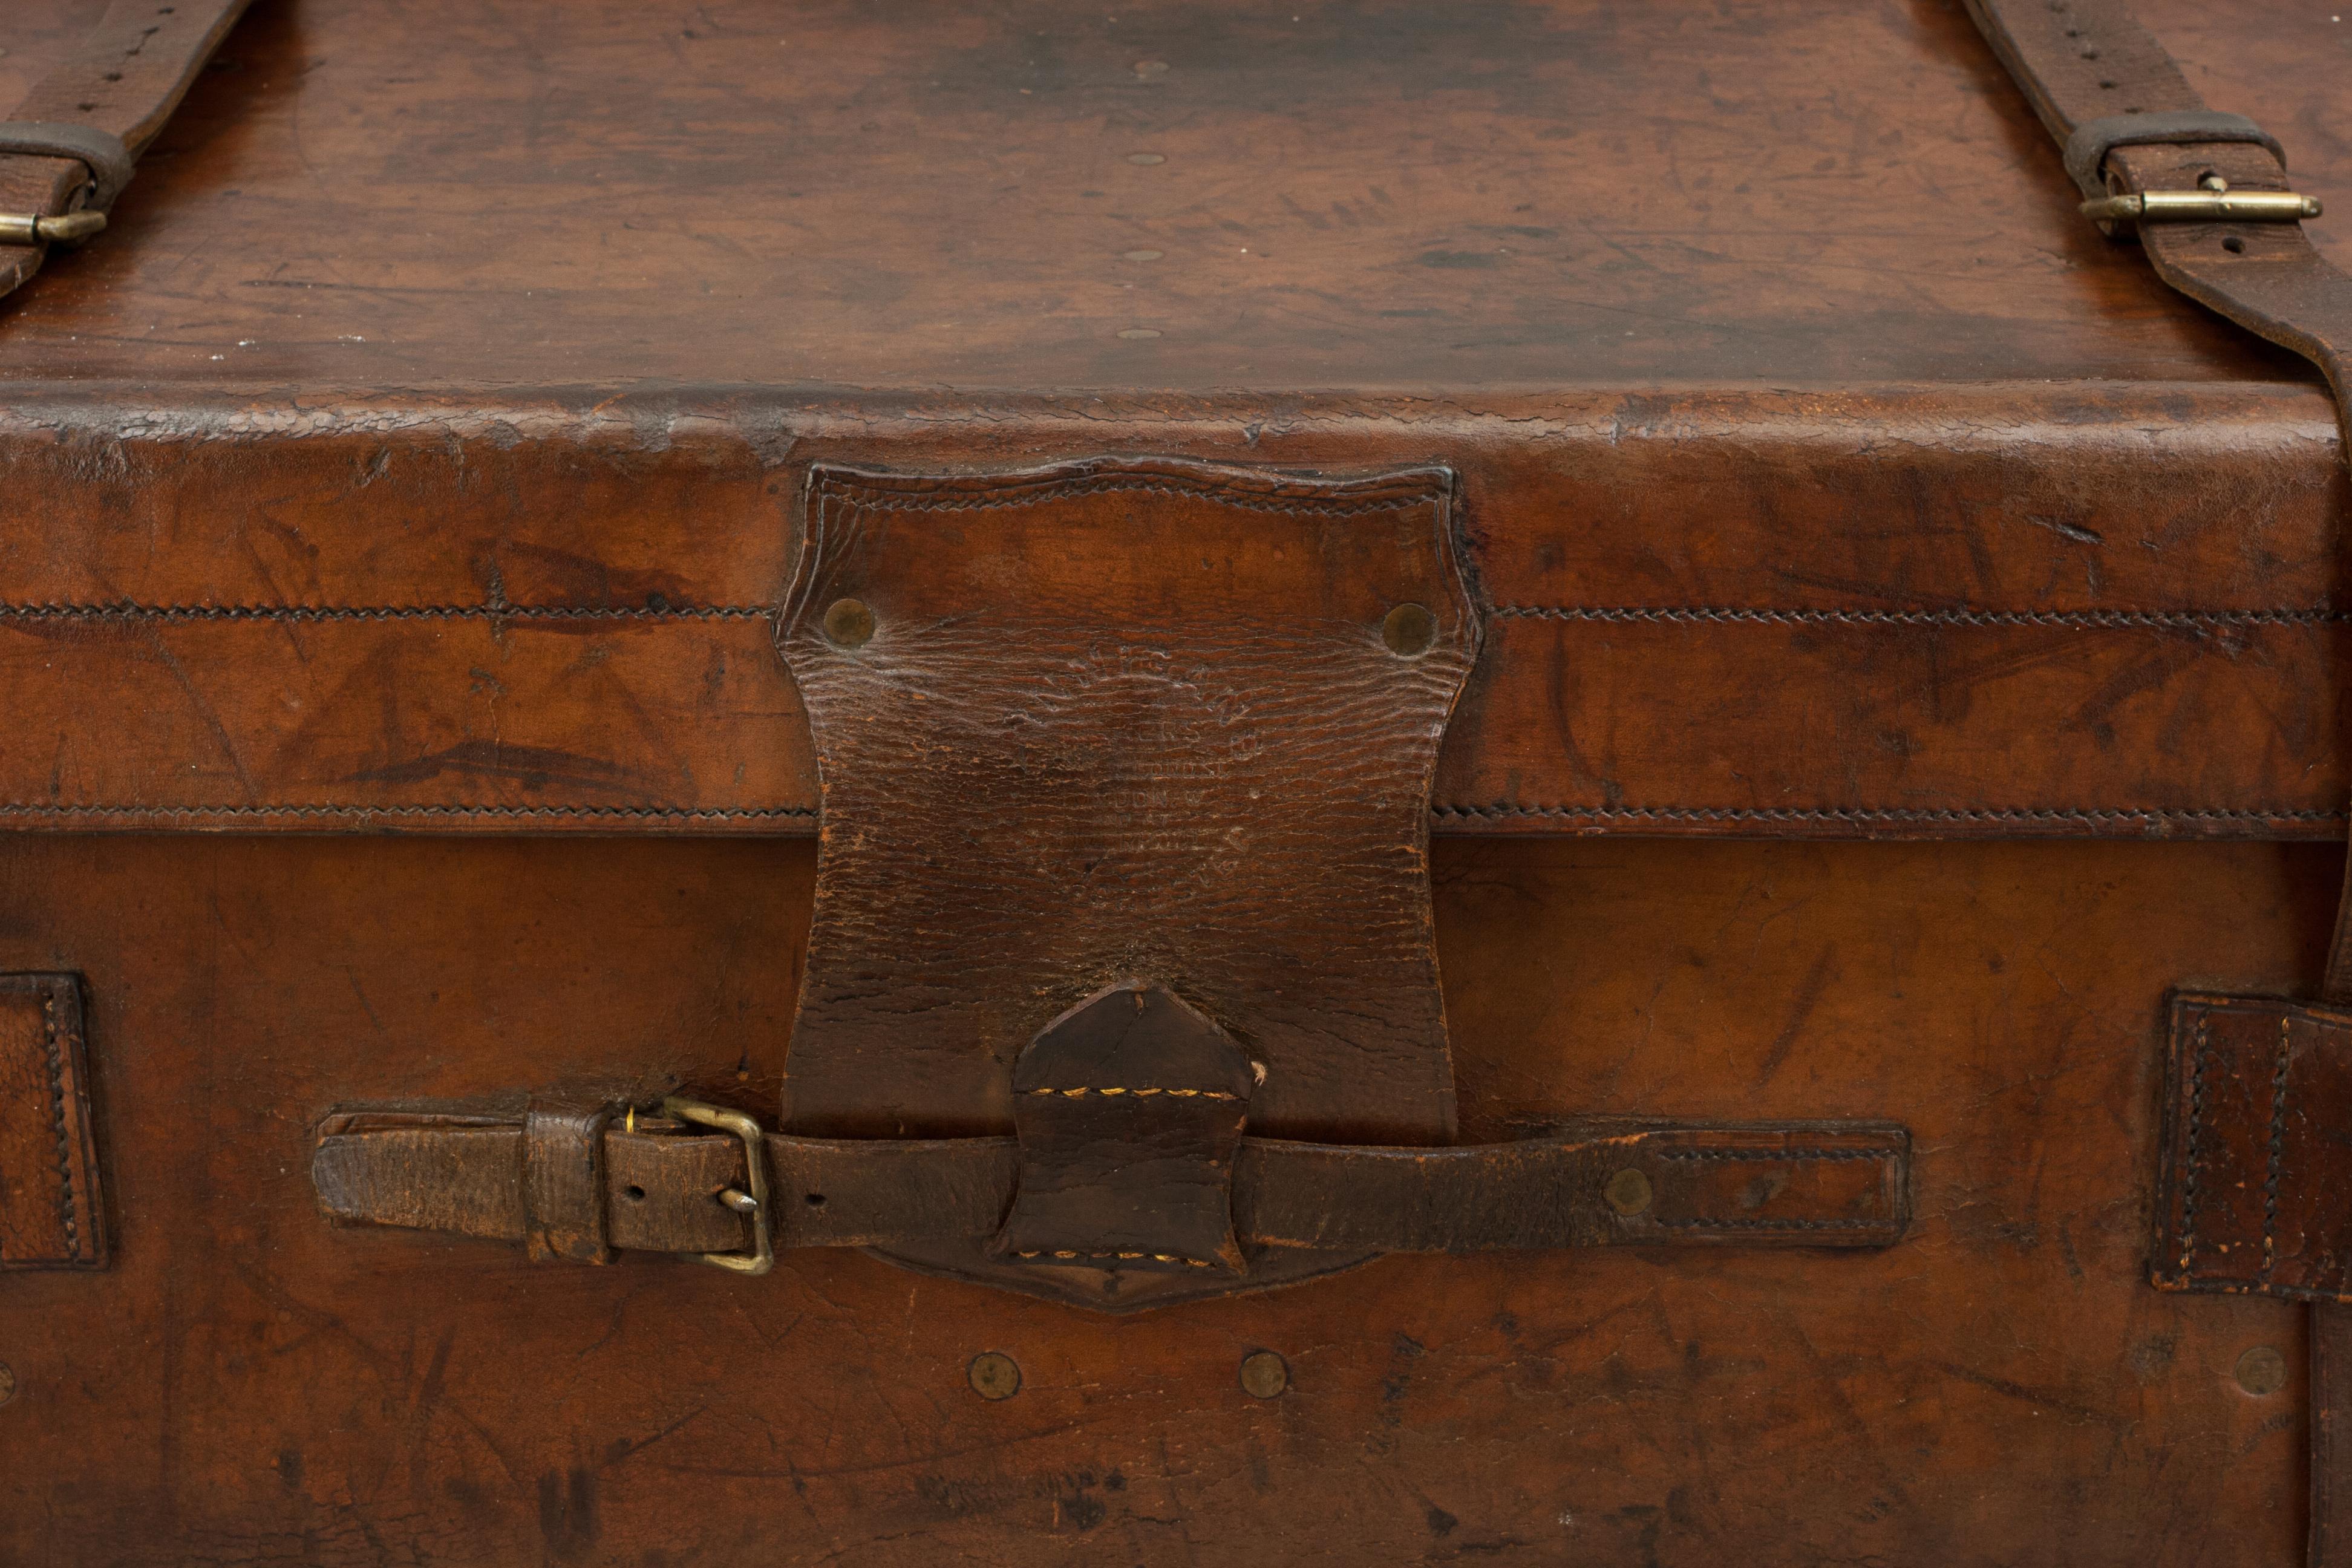 British Antique Leather Trunk by Finnigans, Bond Street, London Luggage